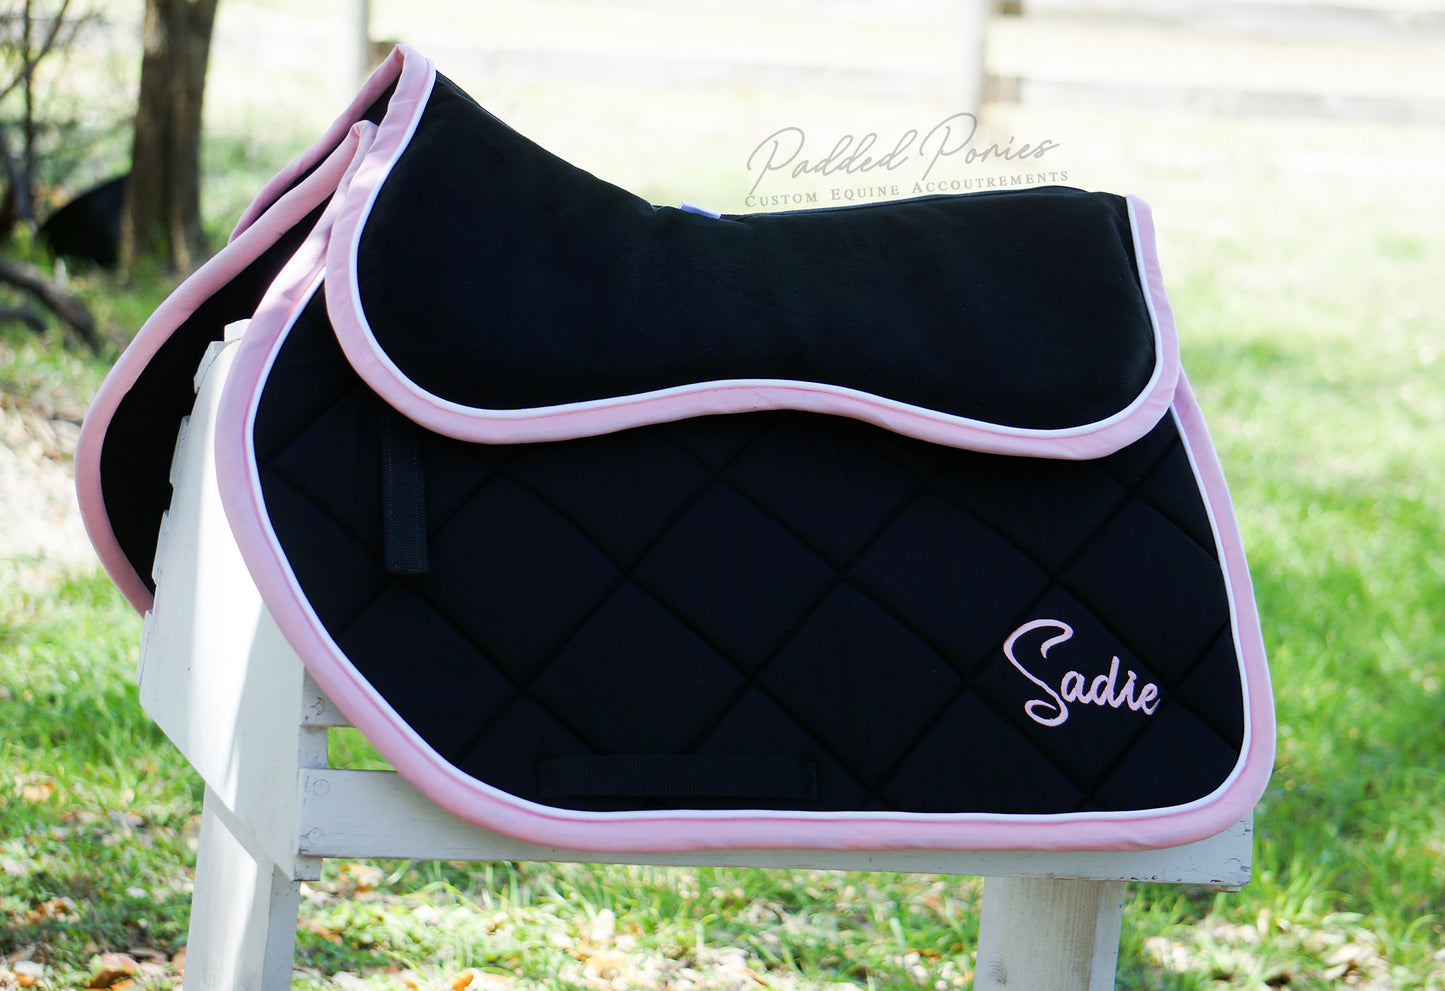 Black and Baby Pink Suede Comfort Memory Foam Jump Half Pad with Matching Pony Size Monogrammed Saddle Pad